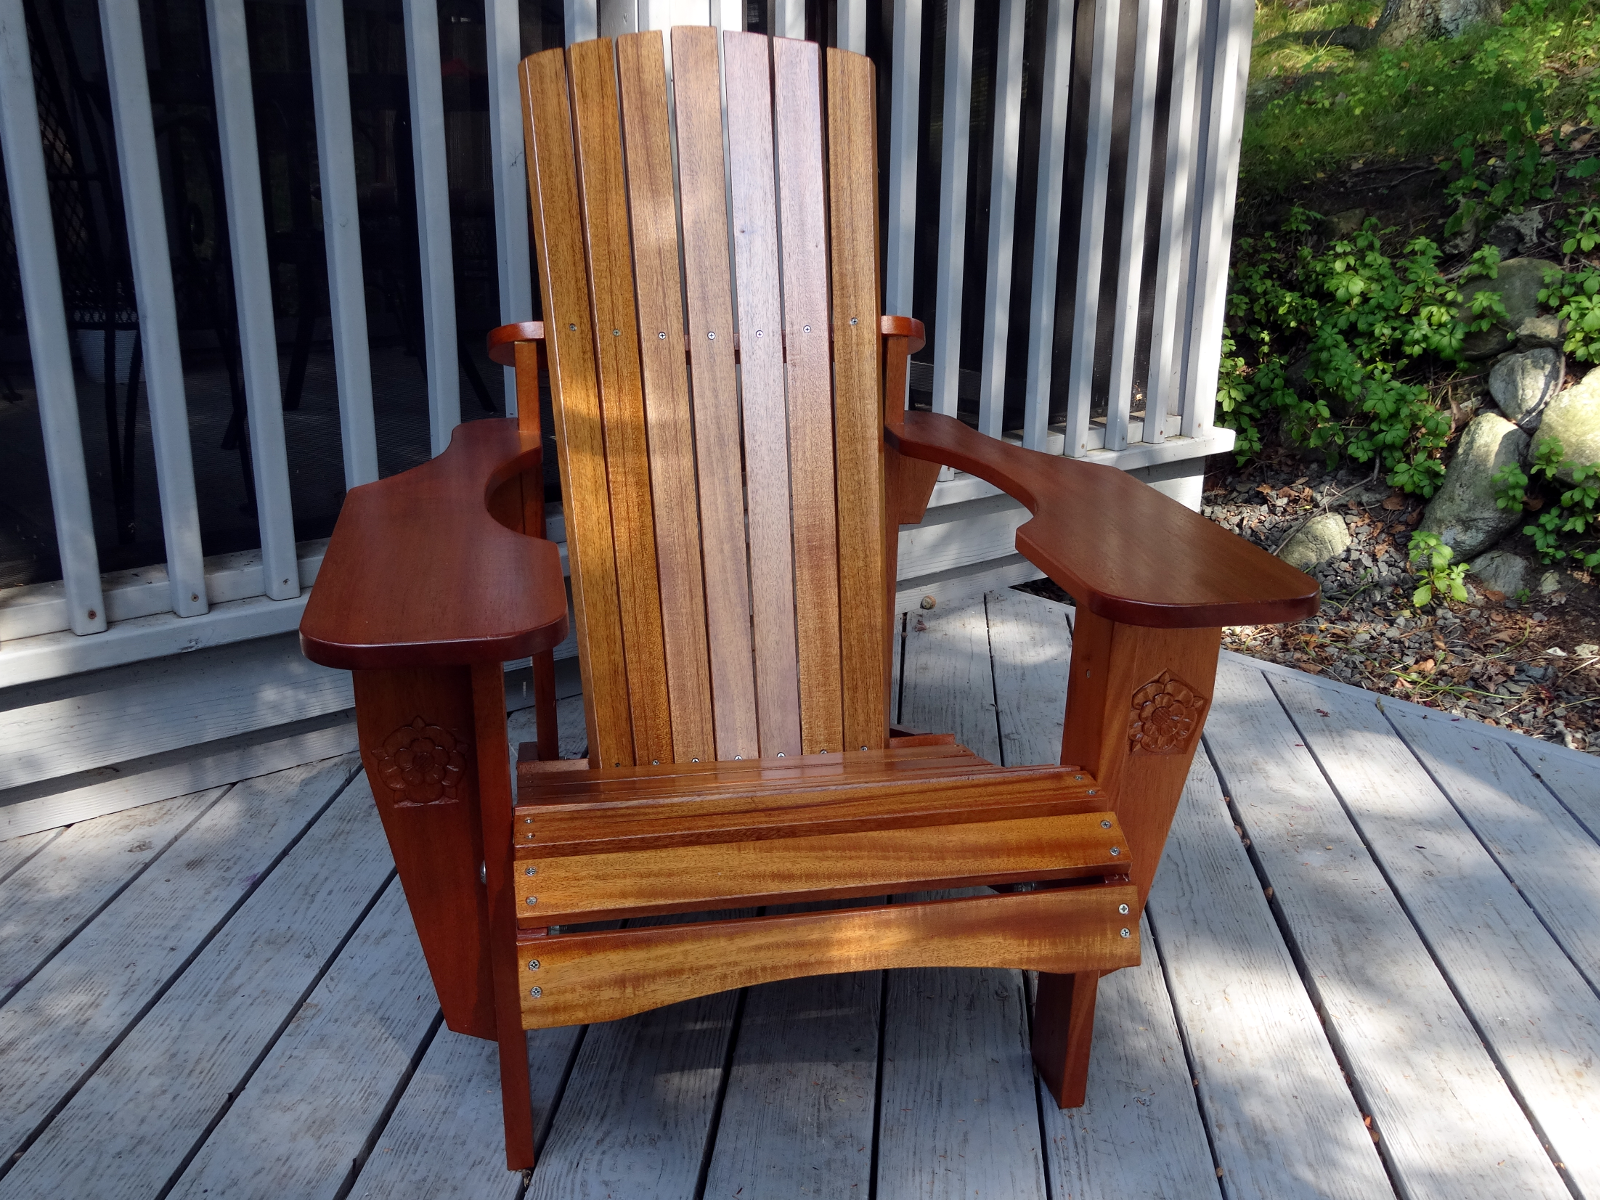 A “Weekend” Project – Adirondack Chair